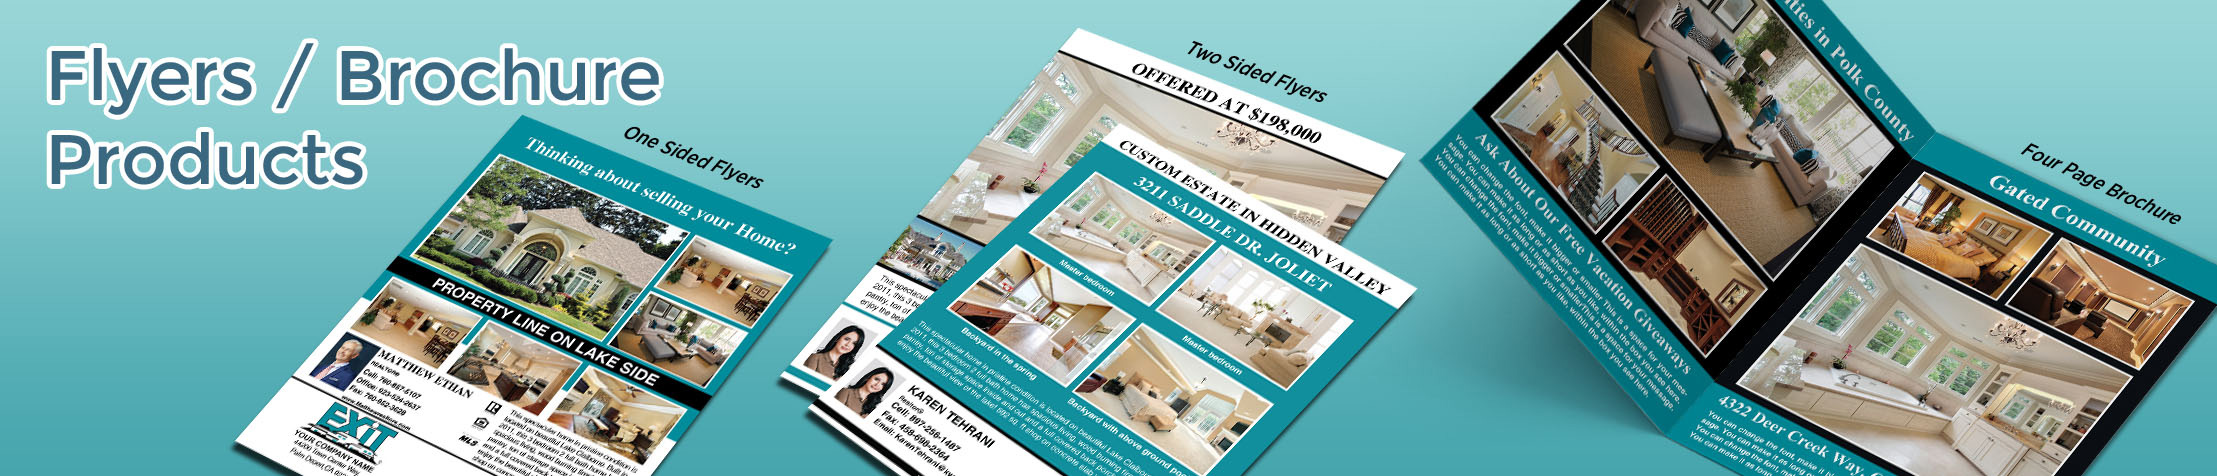 Exit Realty Real Estate Flyers and Brochures - Exit Realty approved vendor flyer and brochure templates for open houses and marketing | BestPrintBuy.com